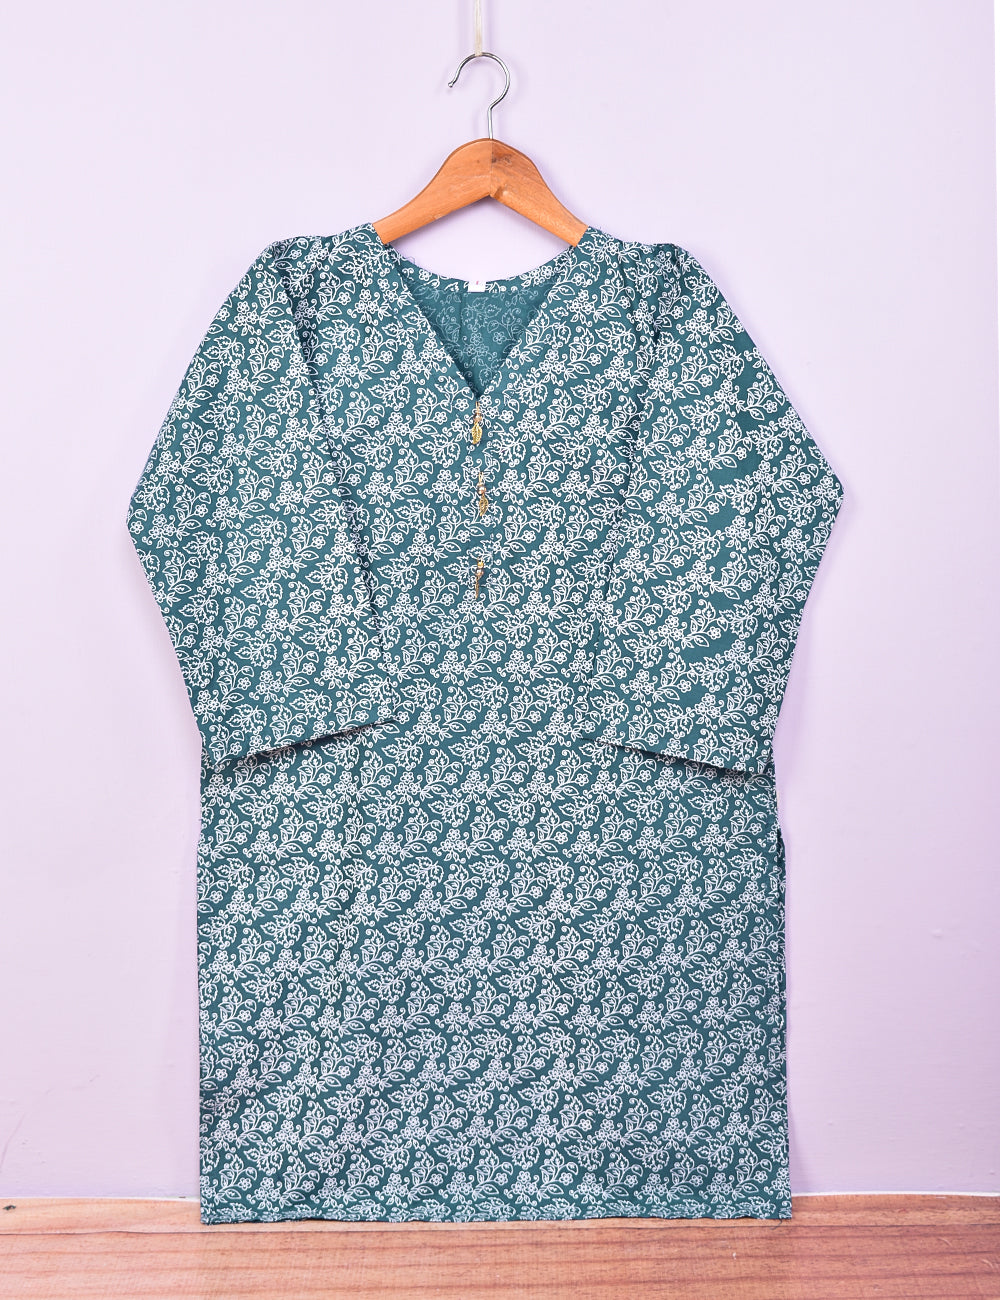 Cotton Printed Stitched Kurti - Ethereal Craze (TS-086A-Turquoise)